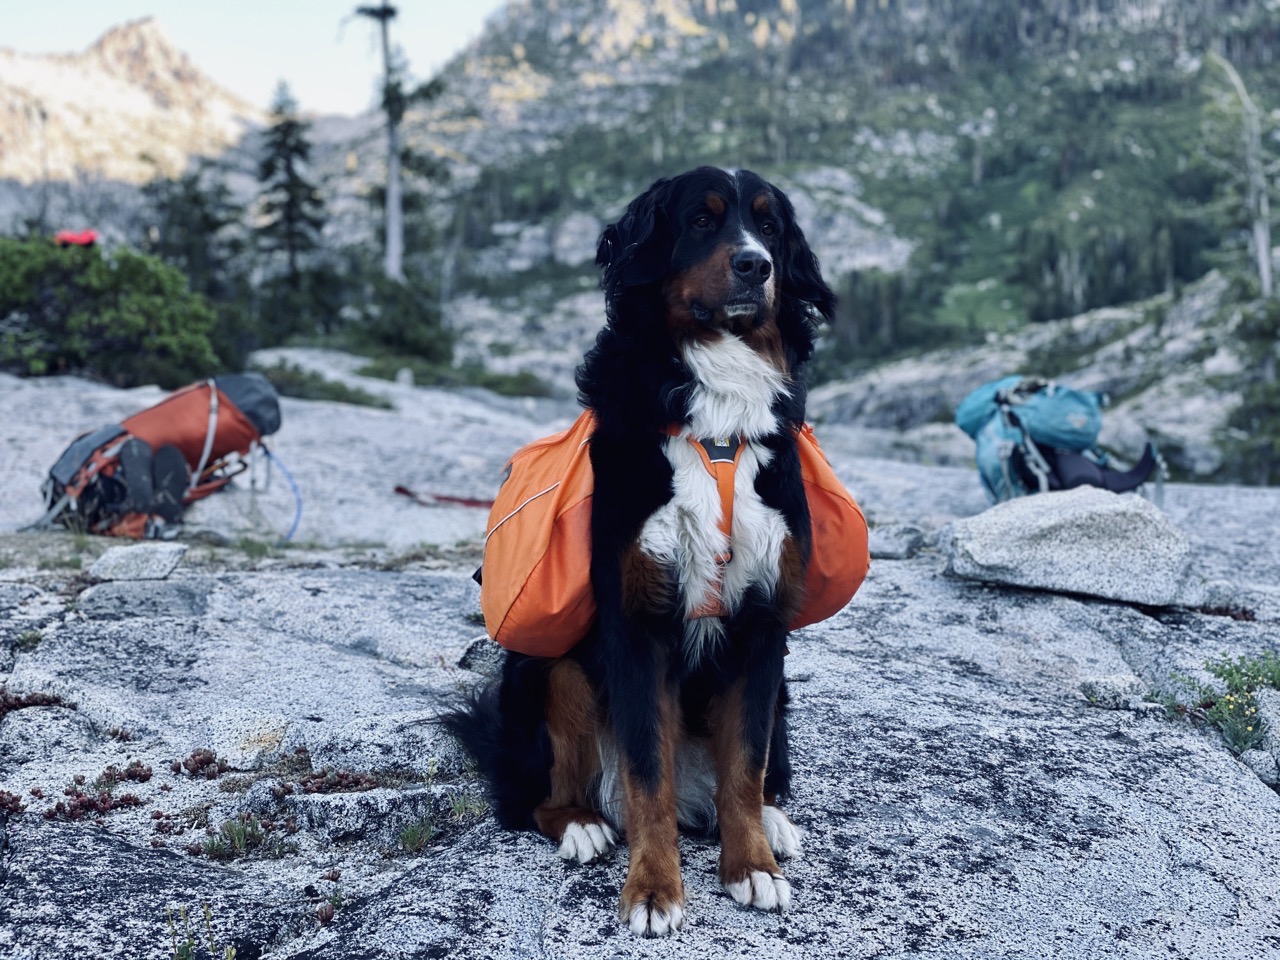 Lyra the backpacking pup